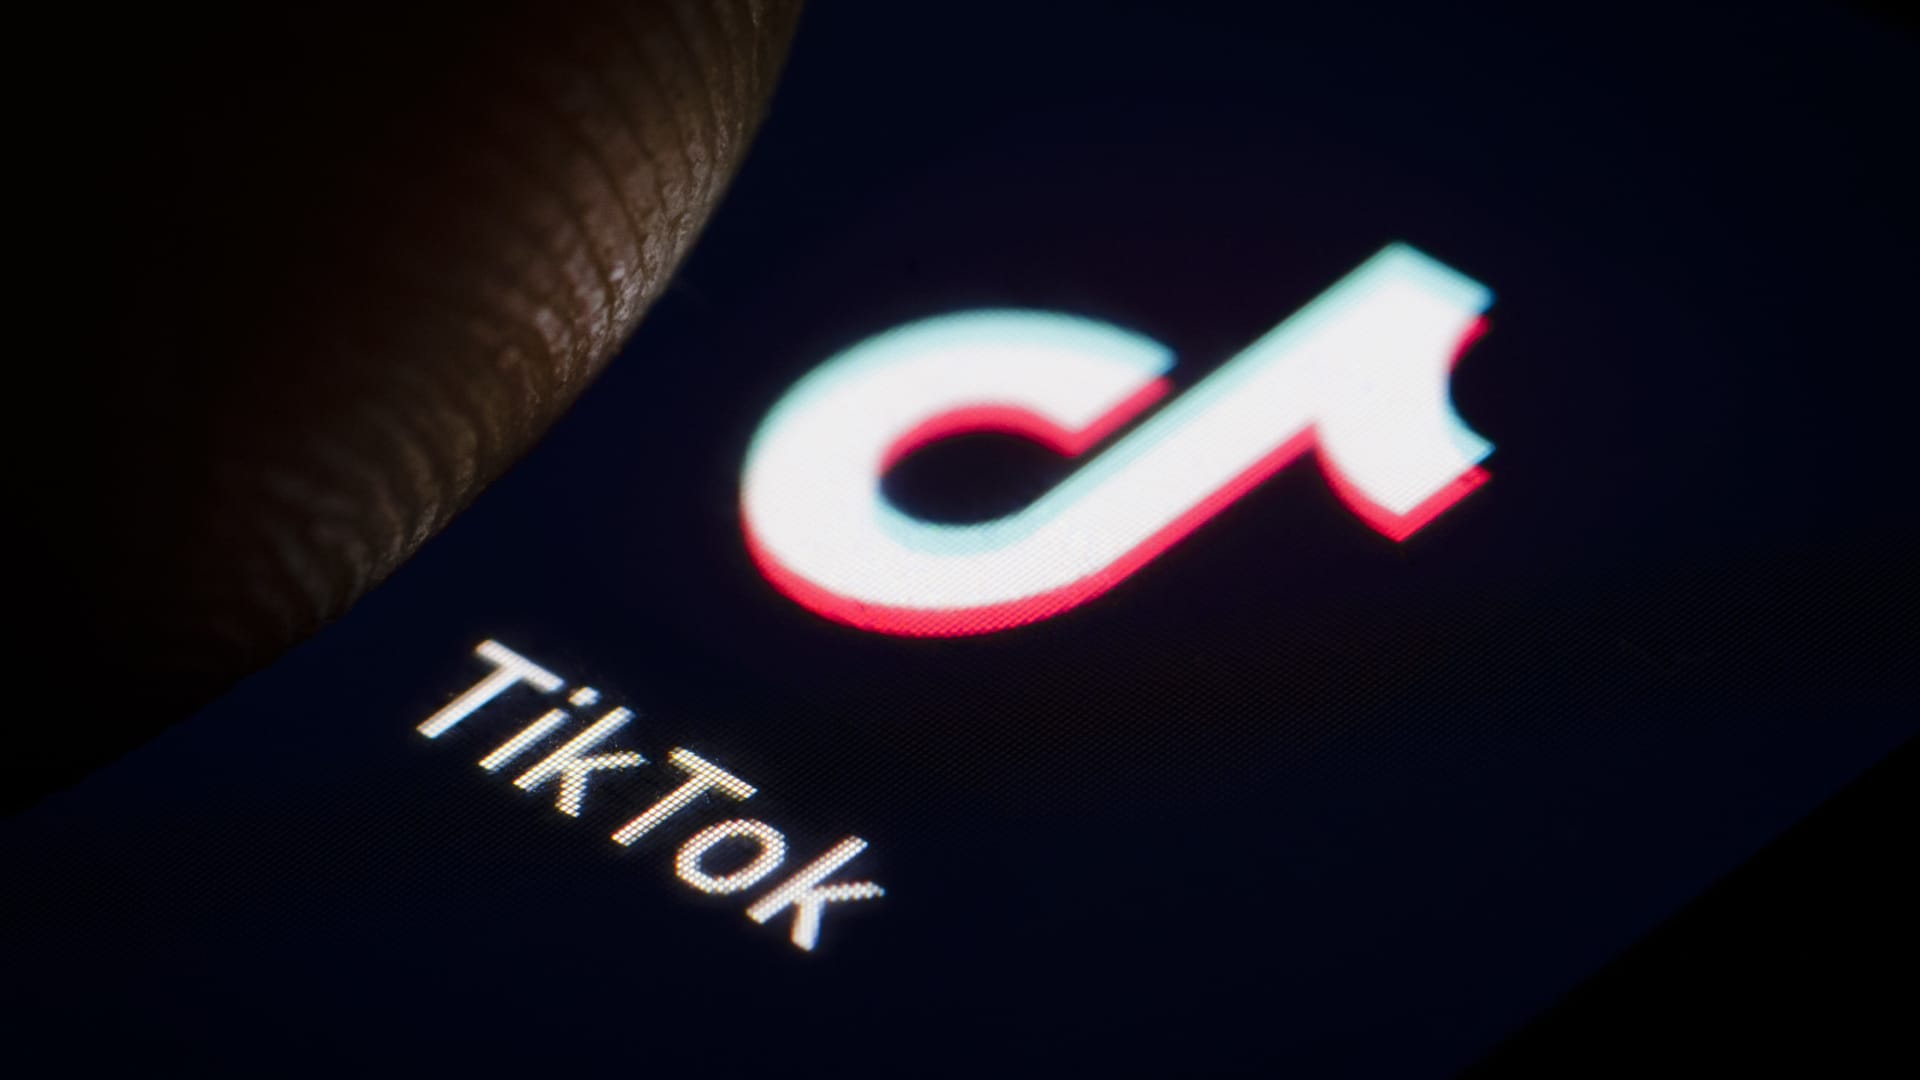 TikTok confirms small test of an ad-free subscription tier outside